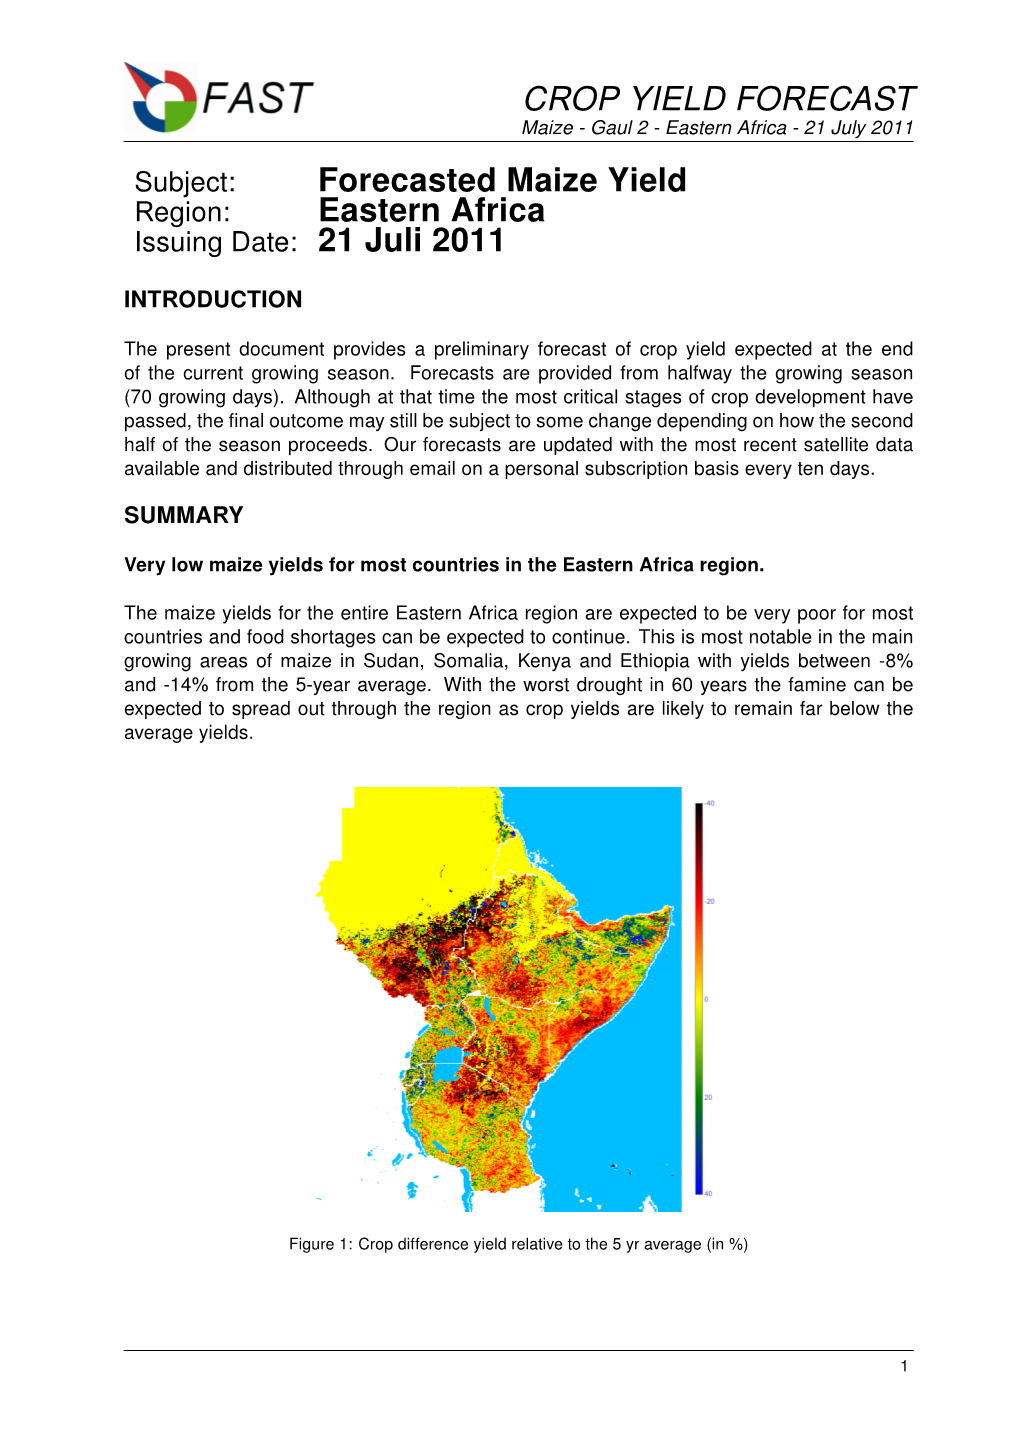 CROP YIELD FORECAST Forecasted Maize Yield Eastern Africa